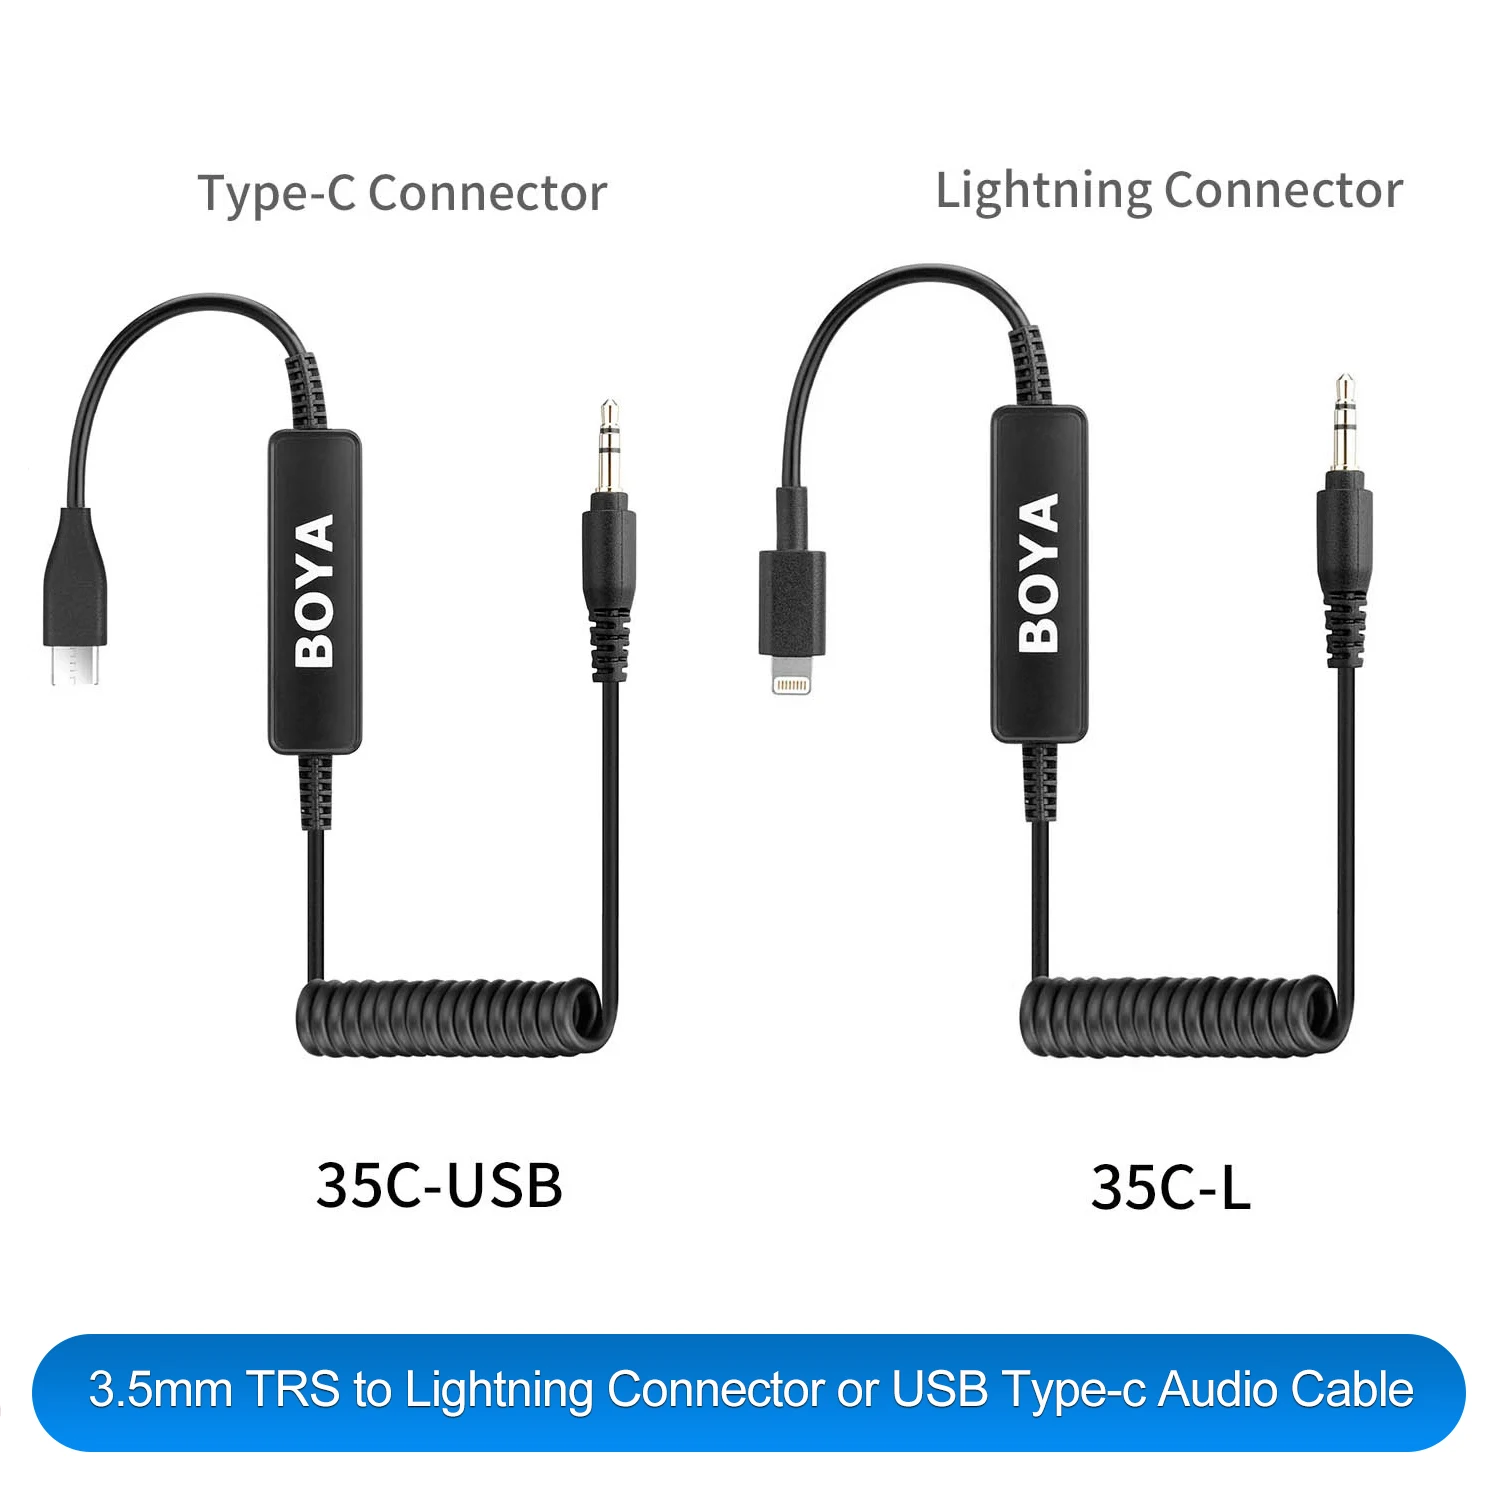 

BOYA 35C-L 3.5mm TRS to Lightning Connector or USB Type-C Audio Cable with Carrying Case for iphone ipad ipod Type-C devices